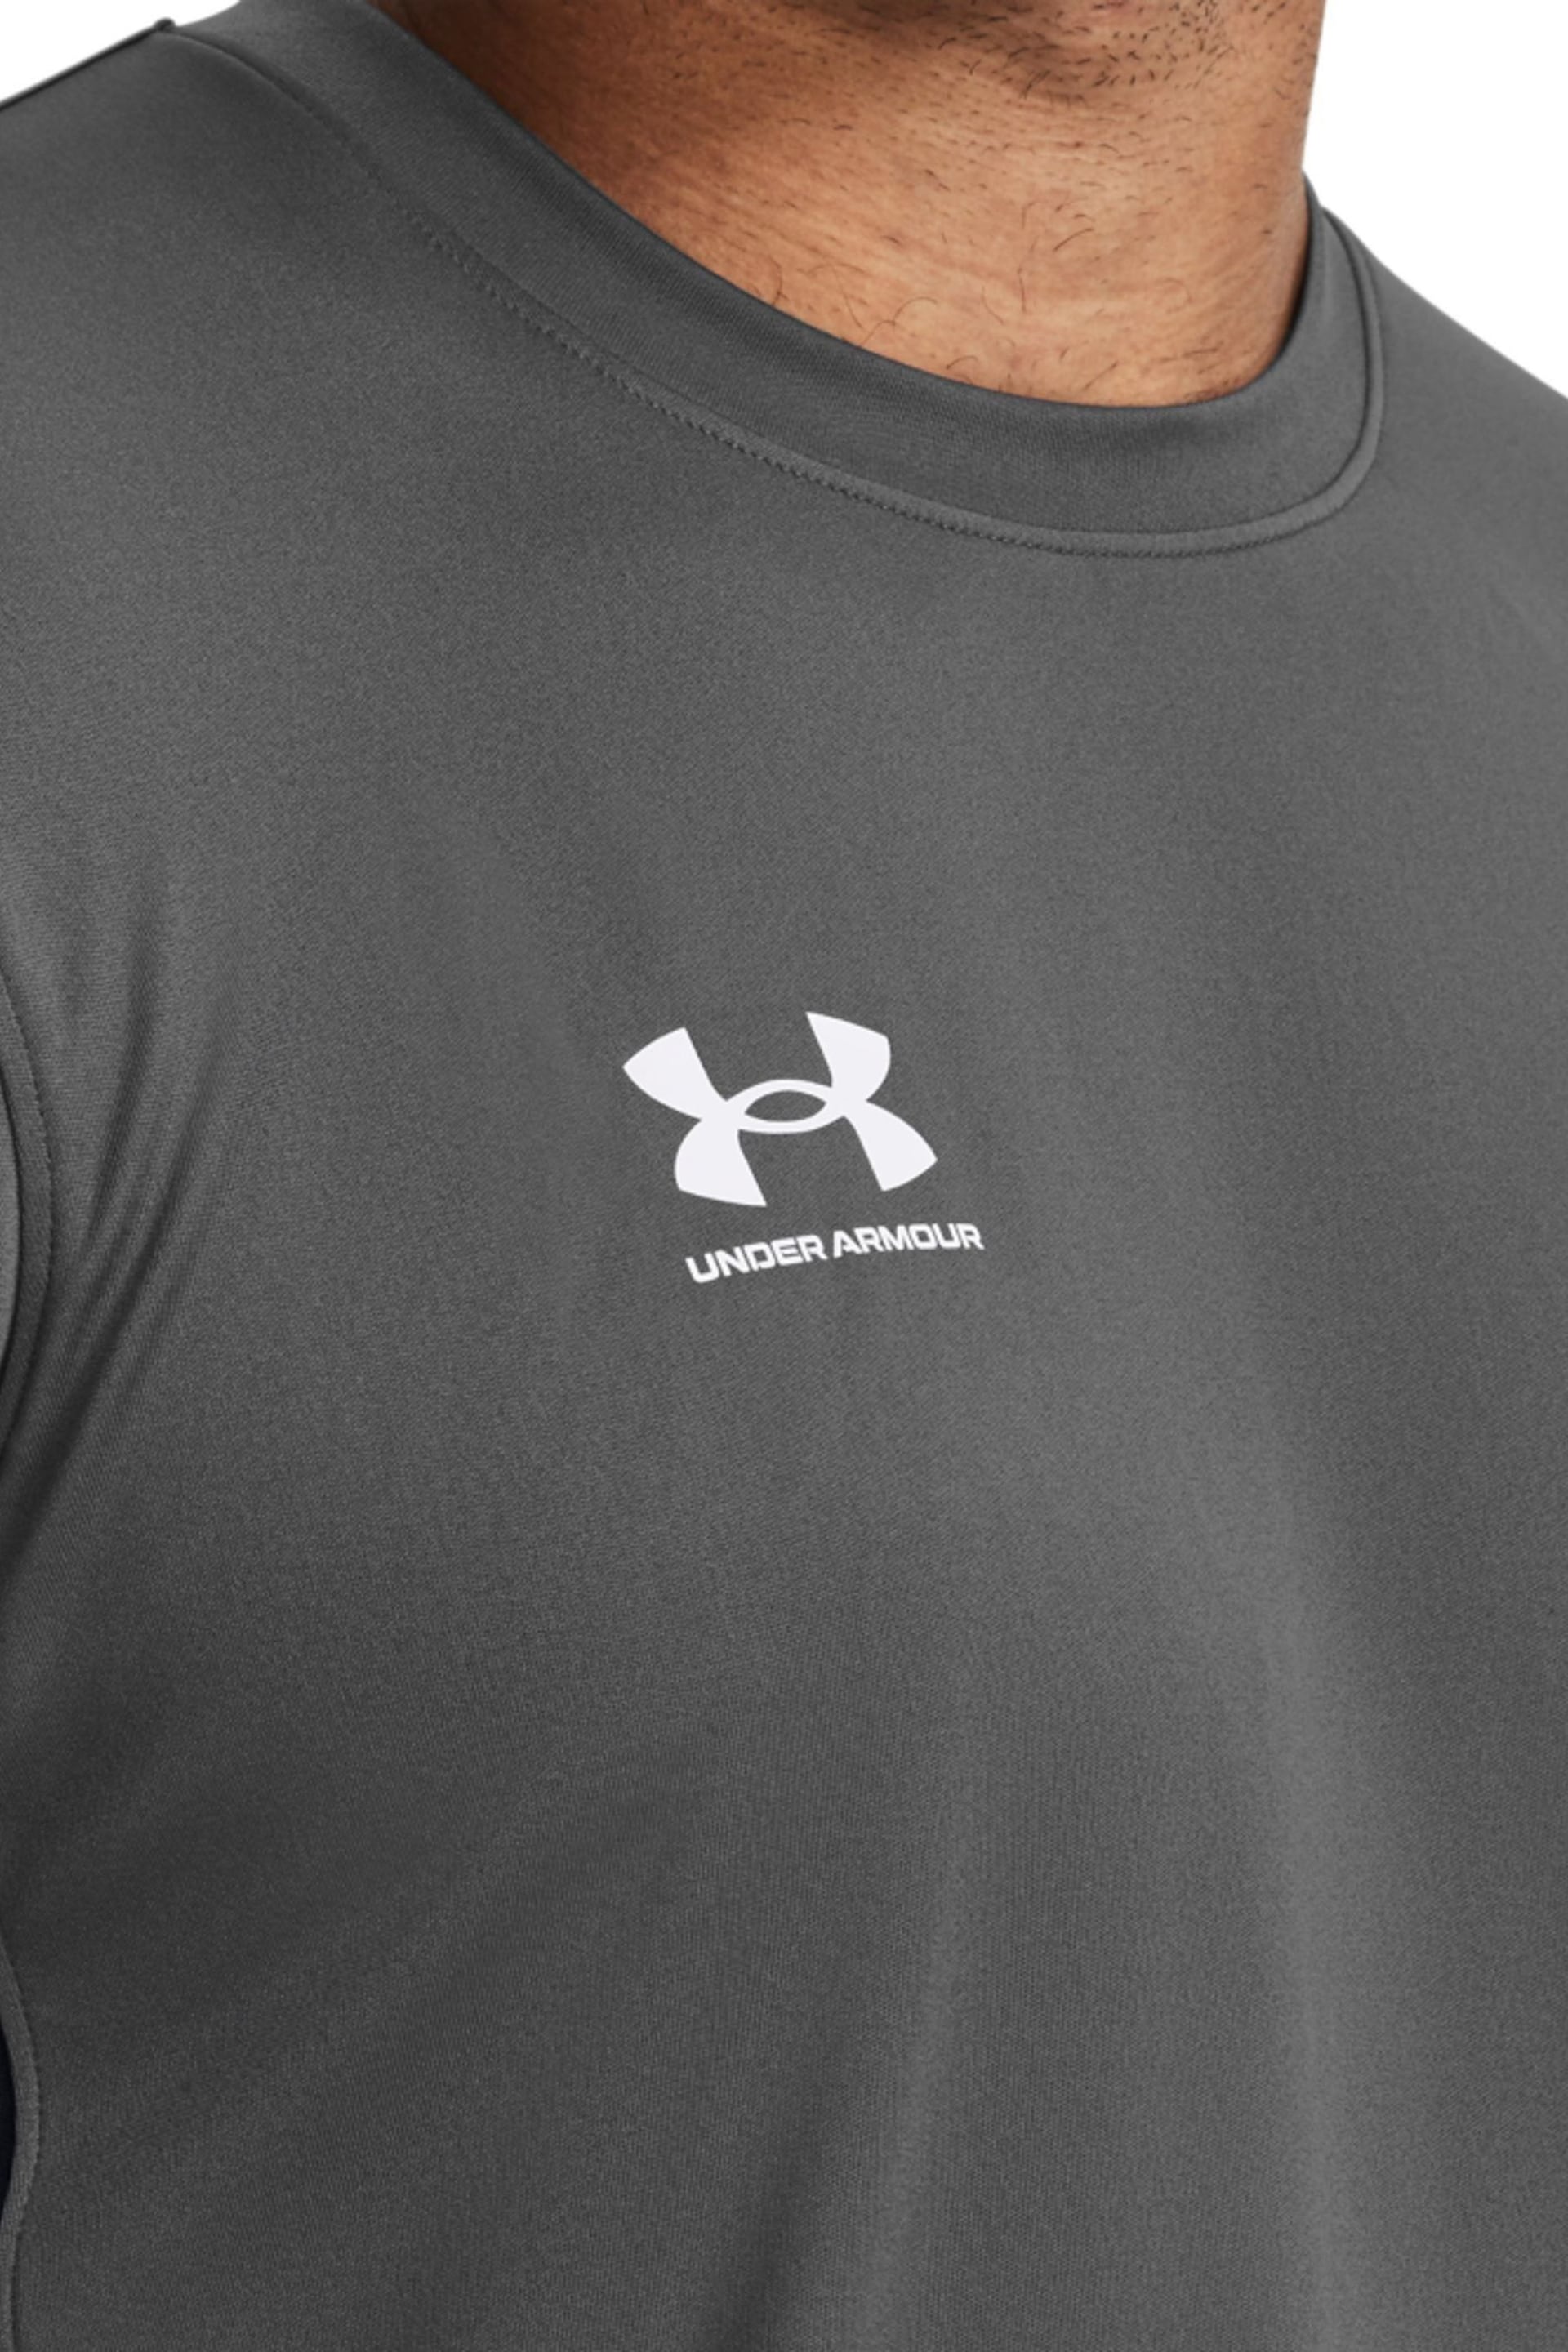 Under Armour Grey Challenger Train Short Sleeve T-Shirt - Image 4 of 6